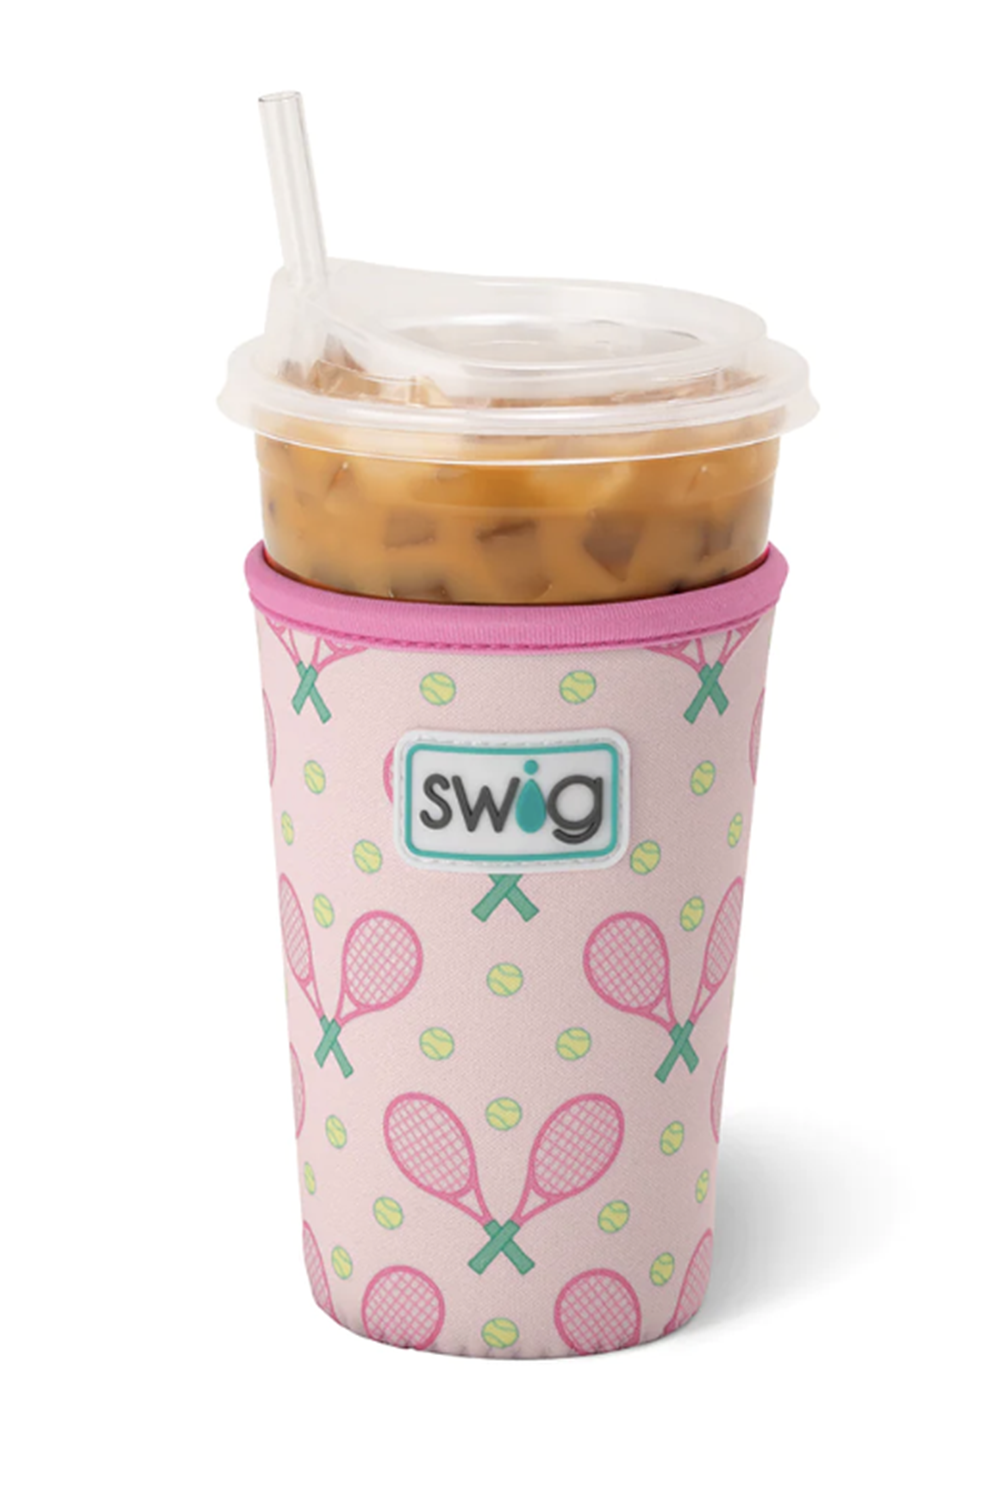 Swig Cup Coolie - Love All